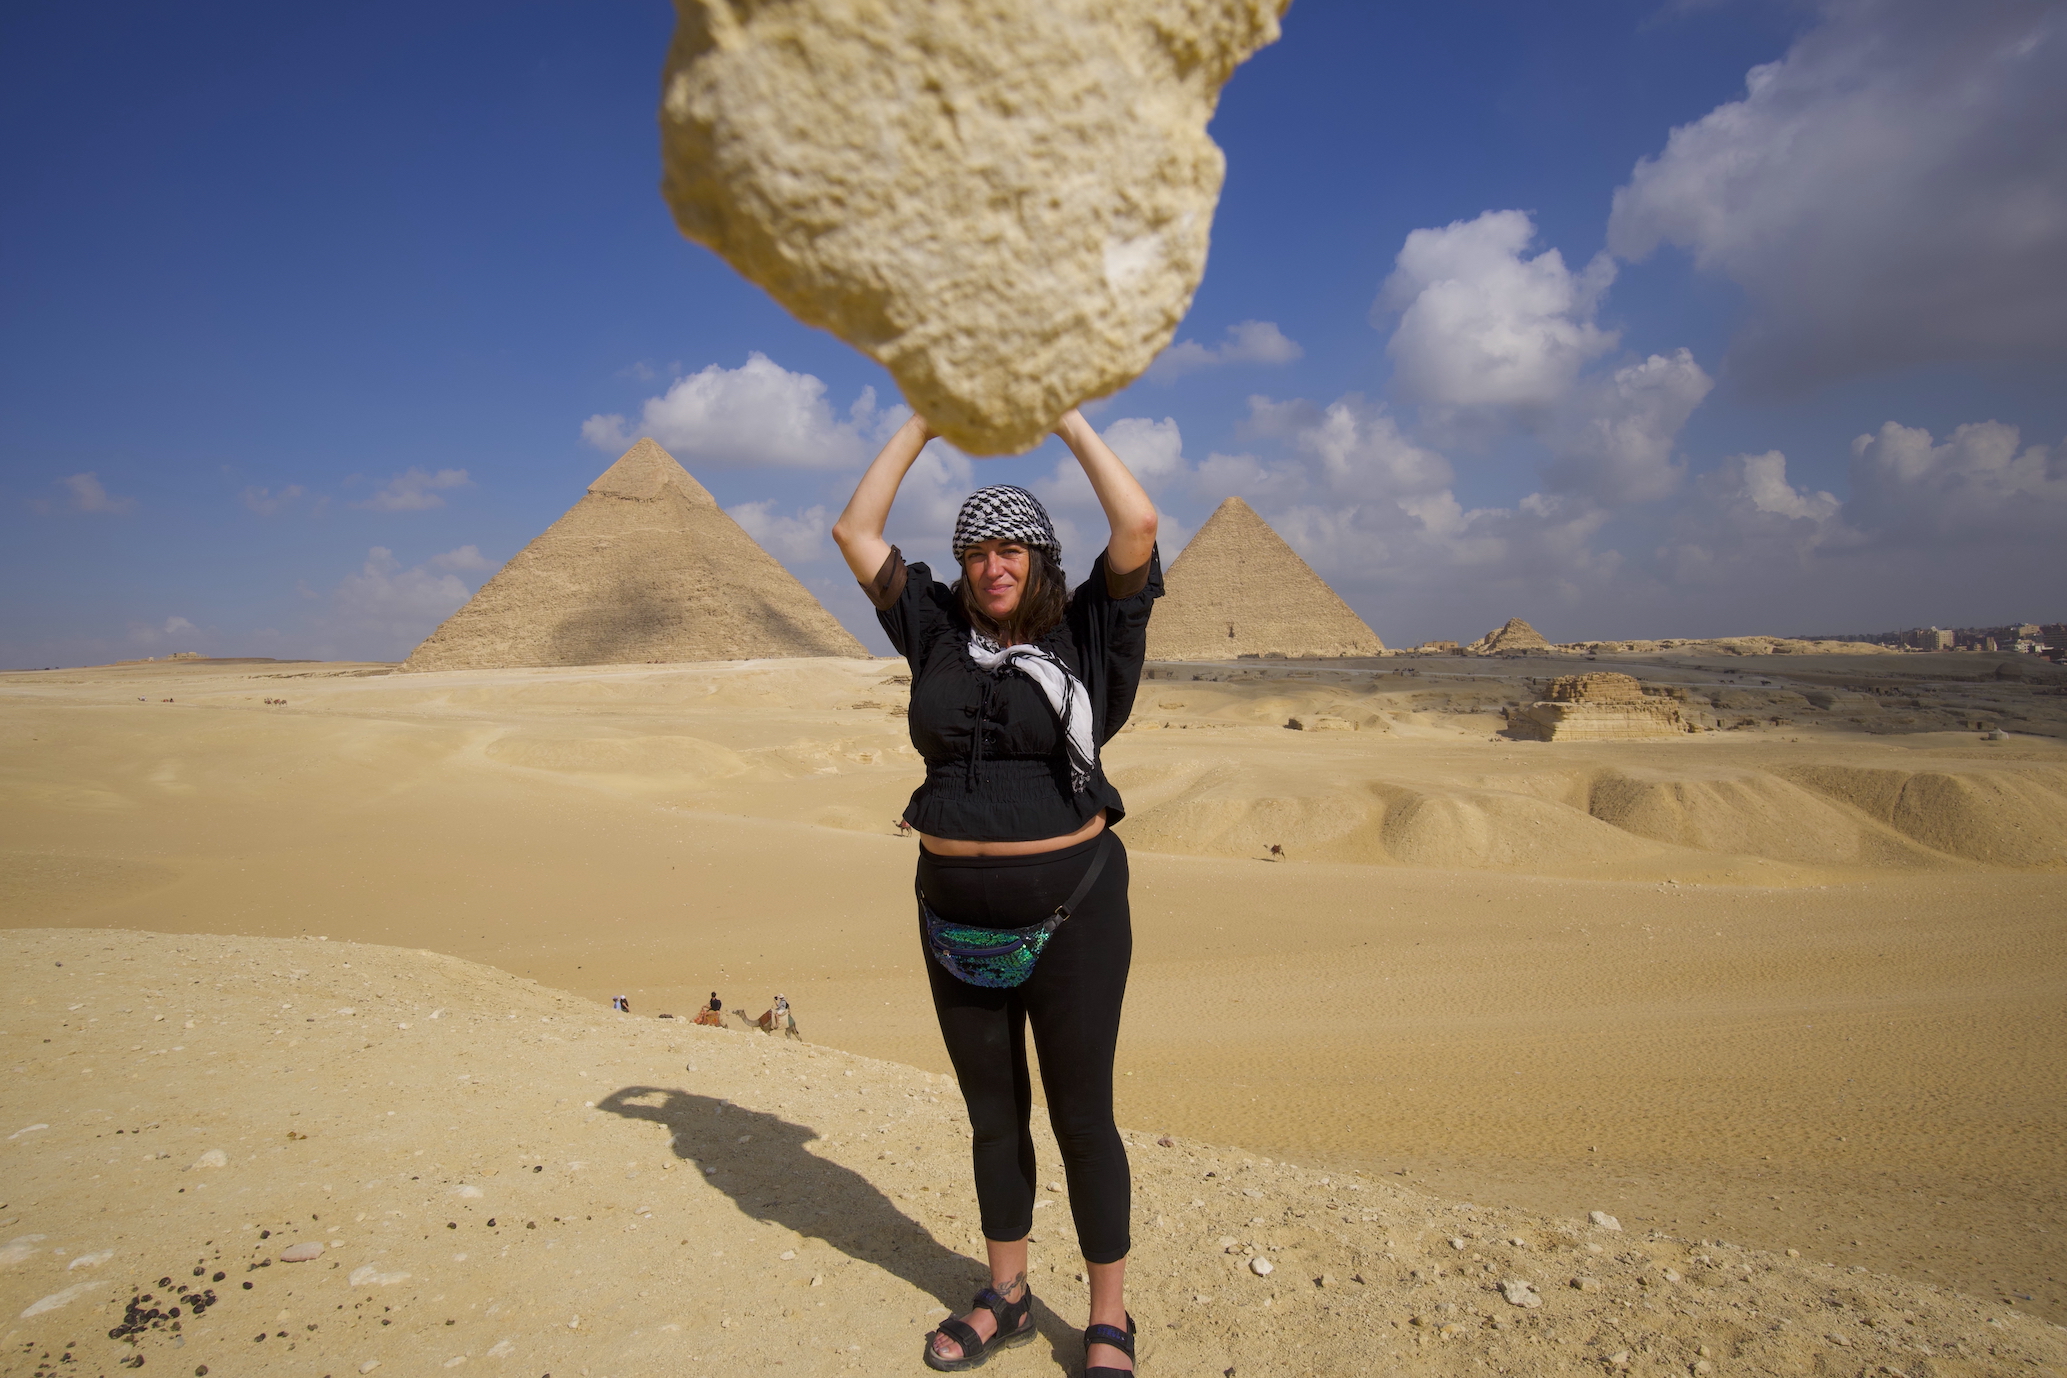 Pyramids panorama view point and photo with Pilar looking as if she is carrying a big stone